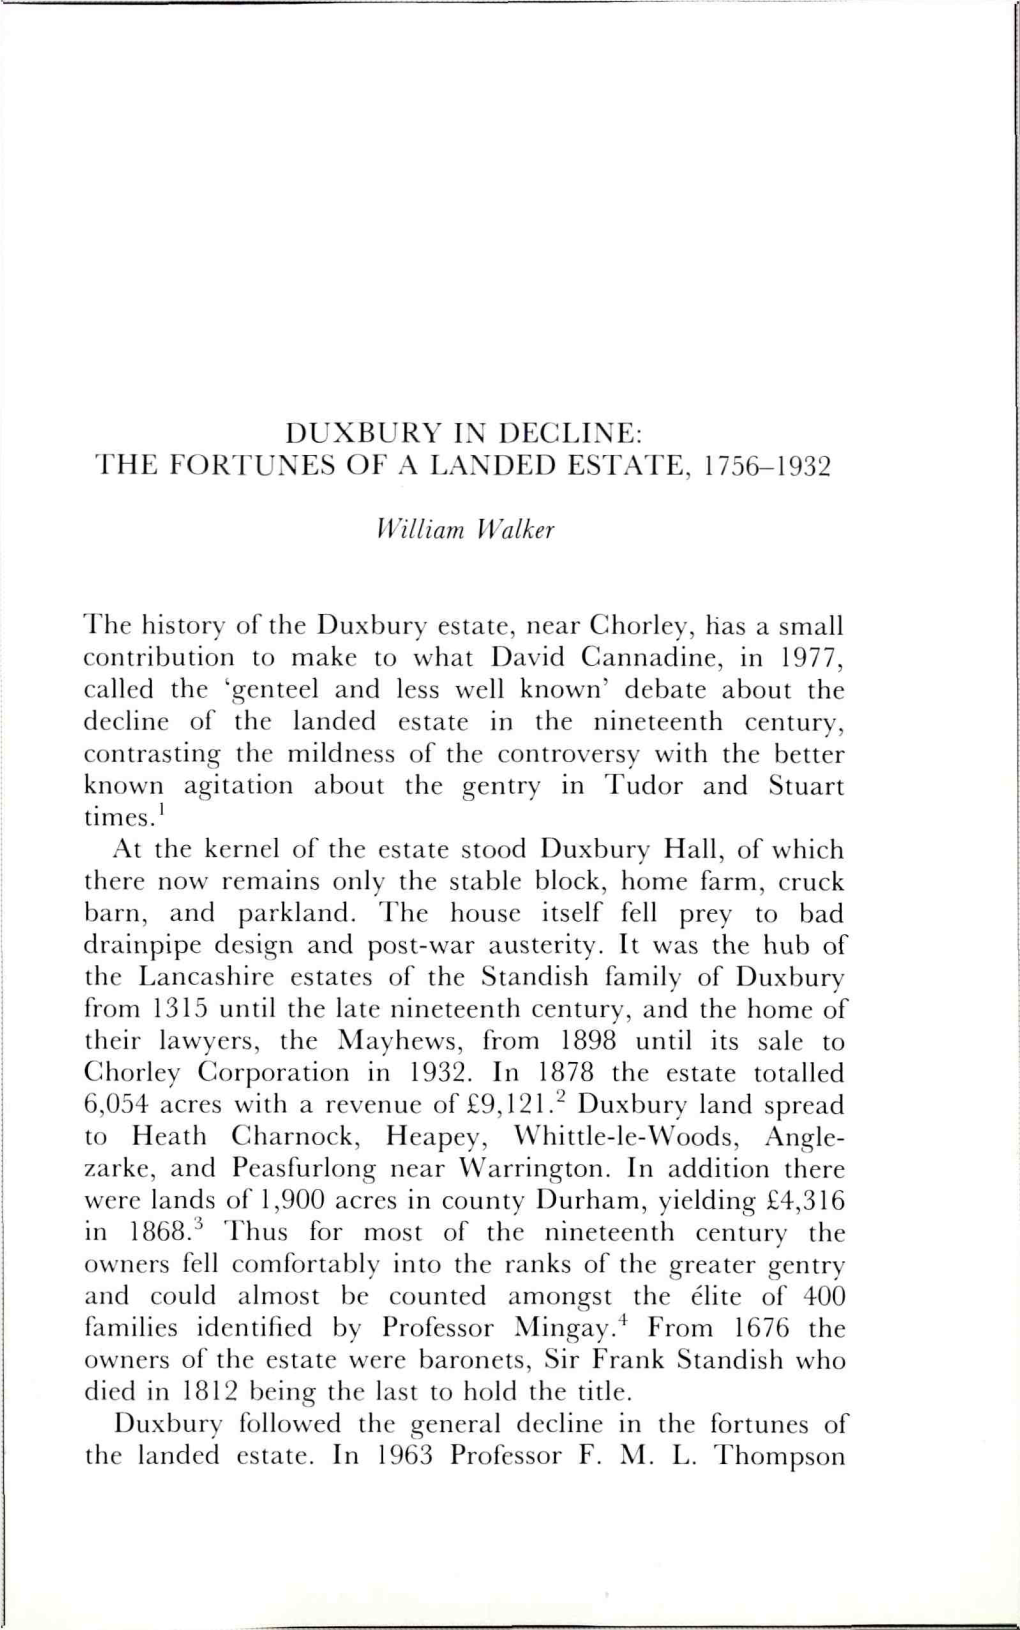 Duxbury in Decline: the Fortunes of a Landed Estate, 1756-1932